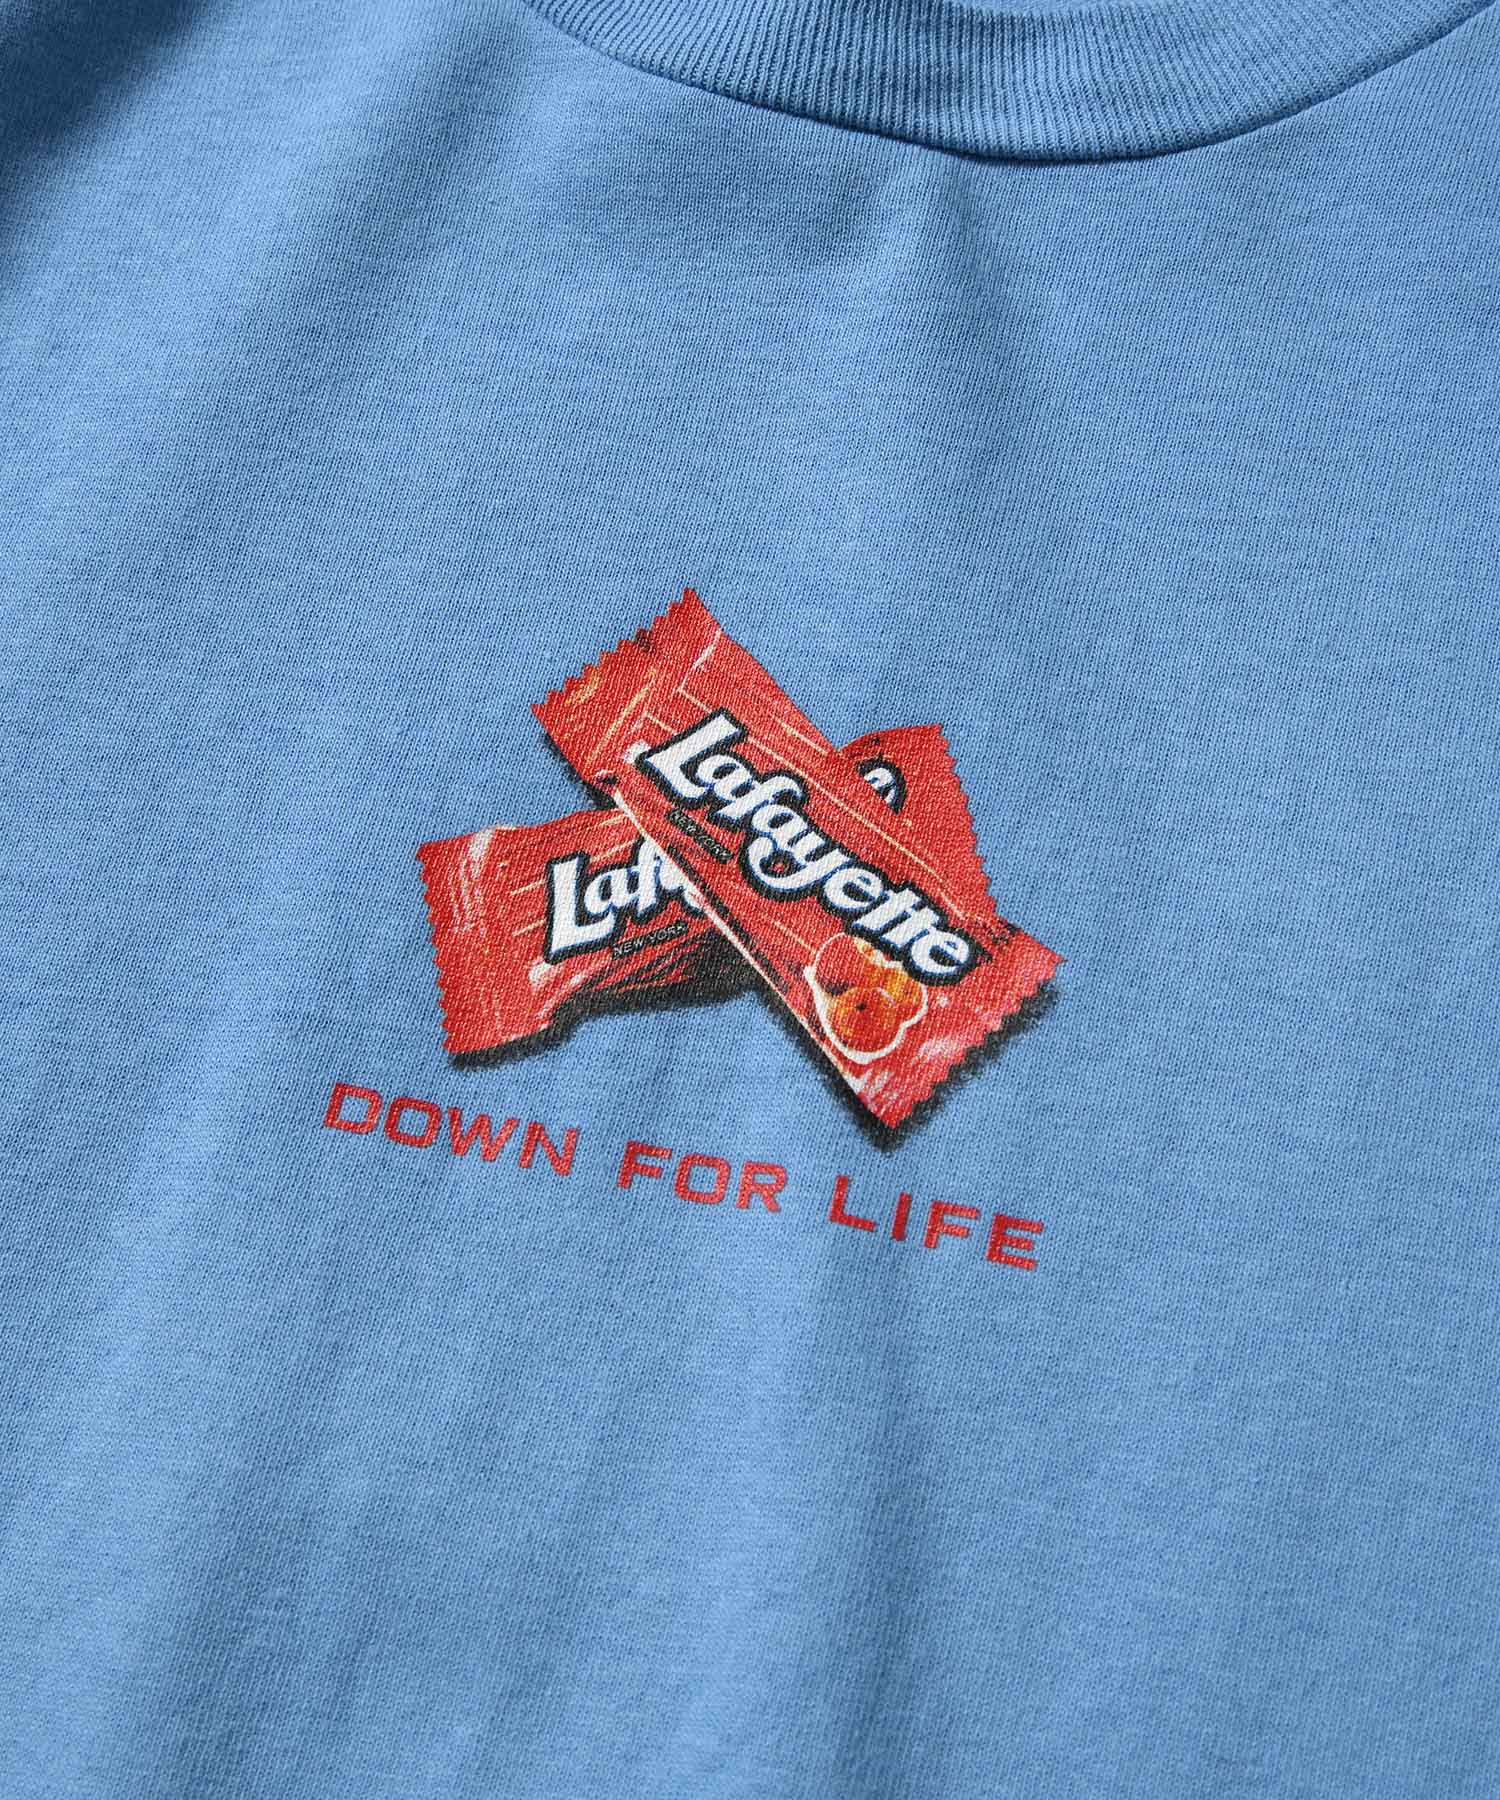 DOWN FOR LIFE TEE LS220106 BLUE